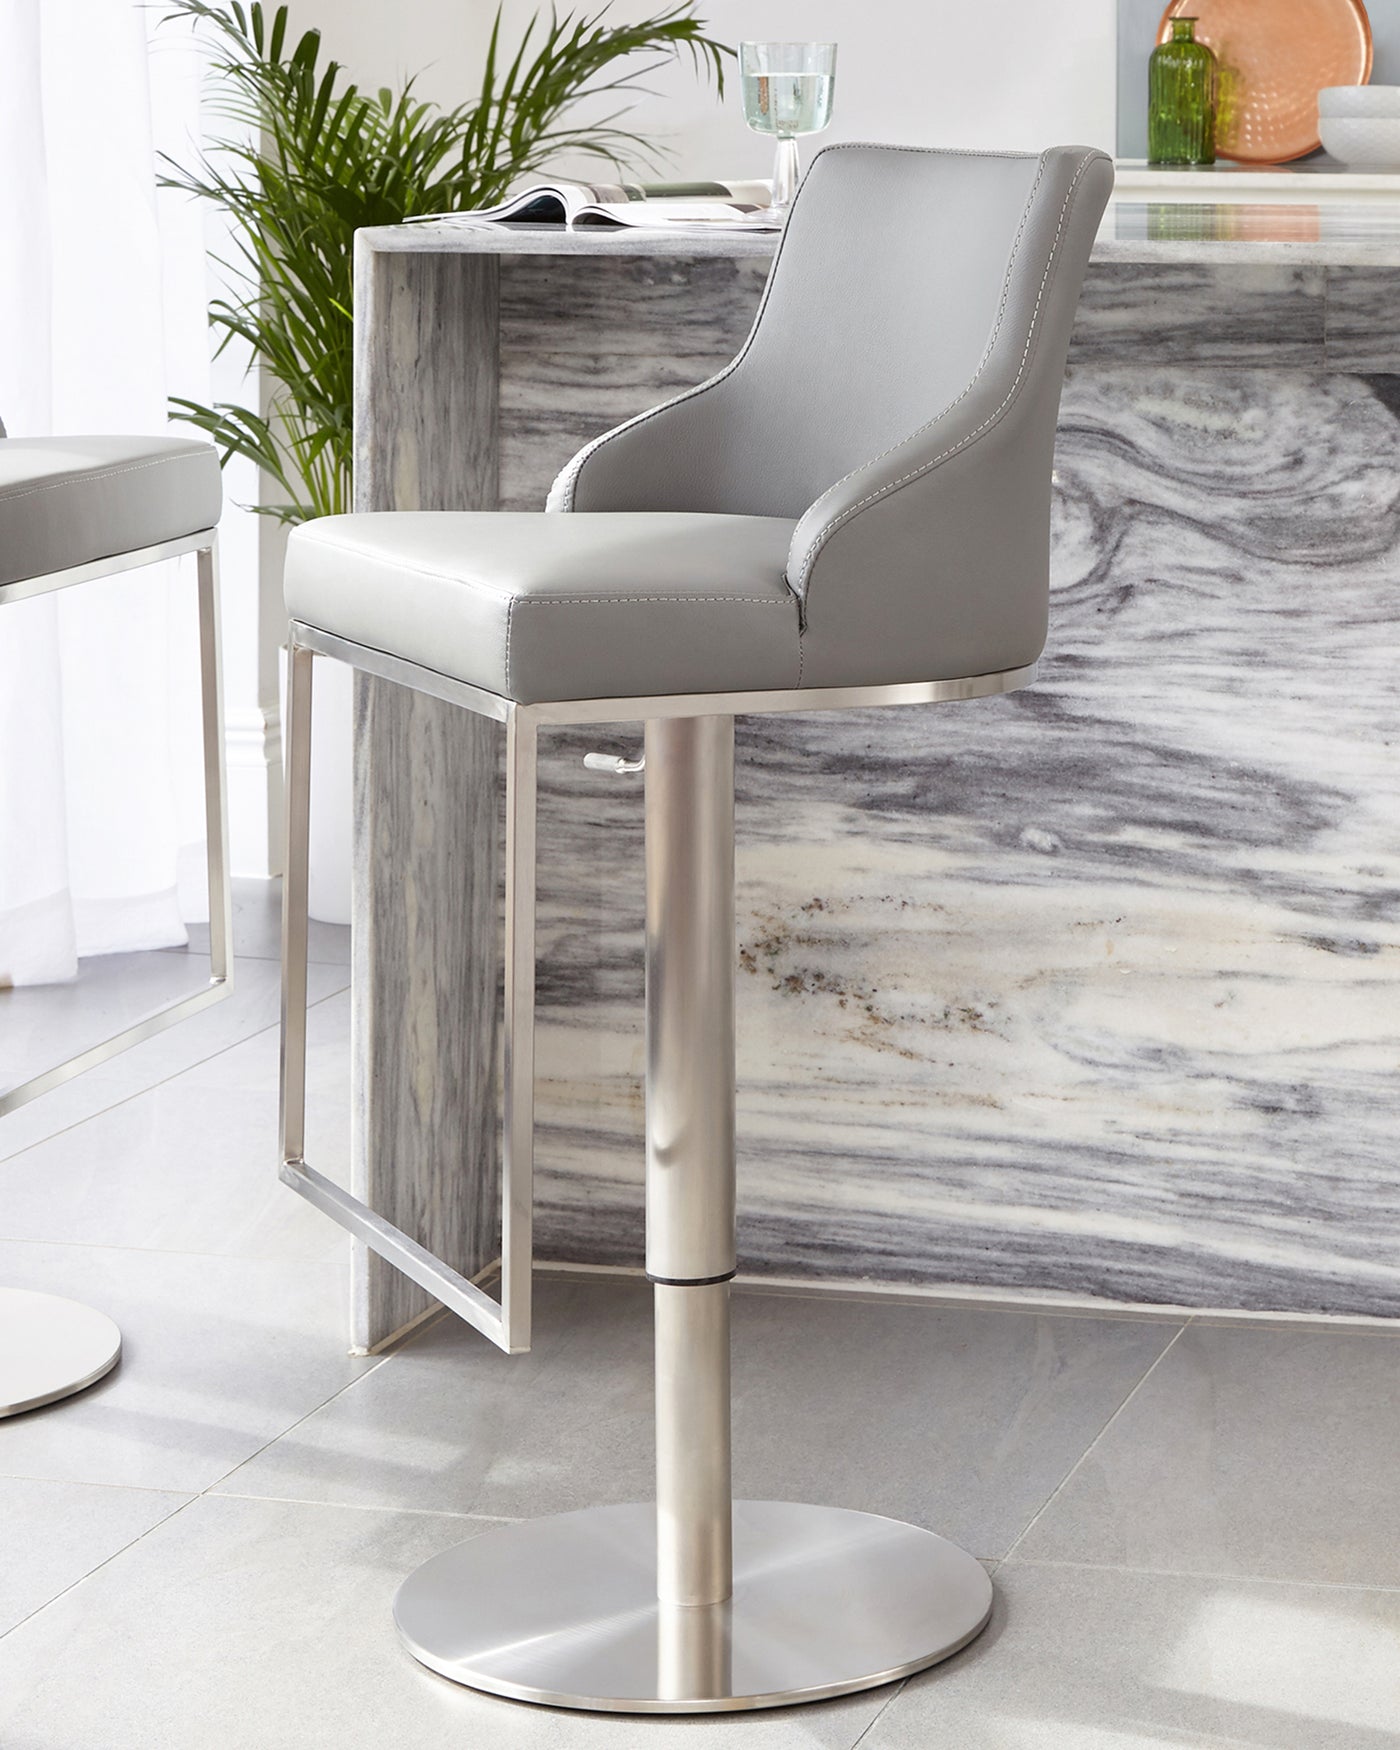 Modern grey upholstered barstool with a high back, winged sides, and silver nail head trim detailing. Features an adjustable-height chrome base with a built-in footrest and a wide circular foundation for stability.